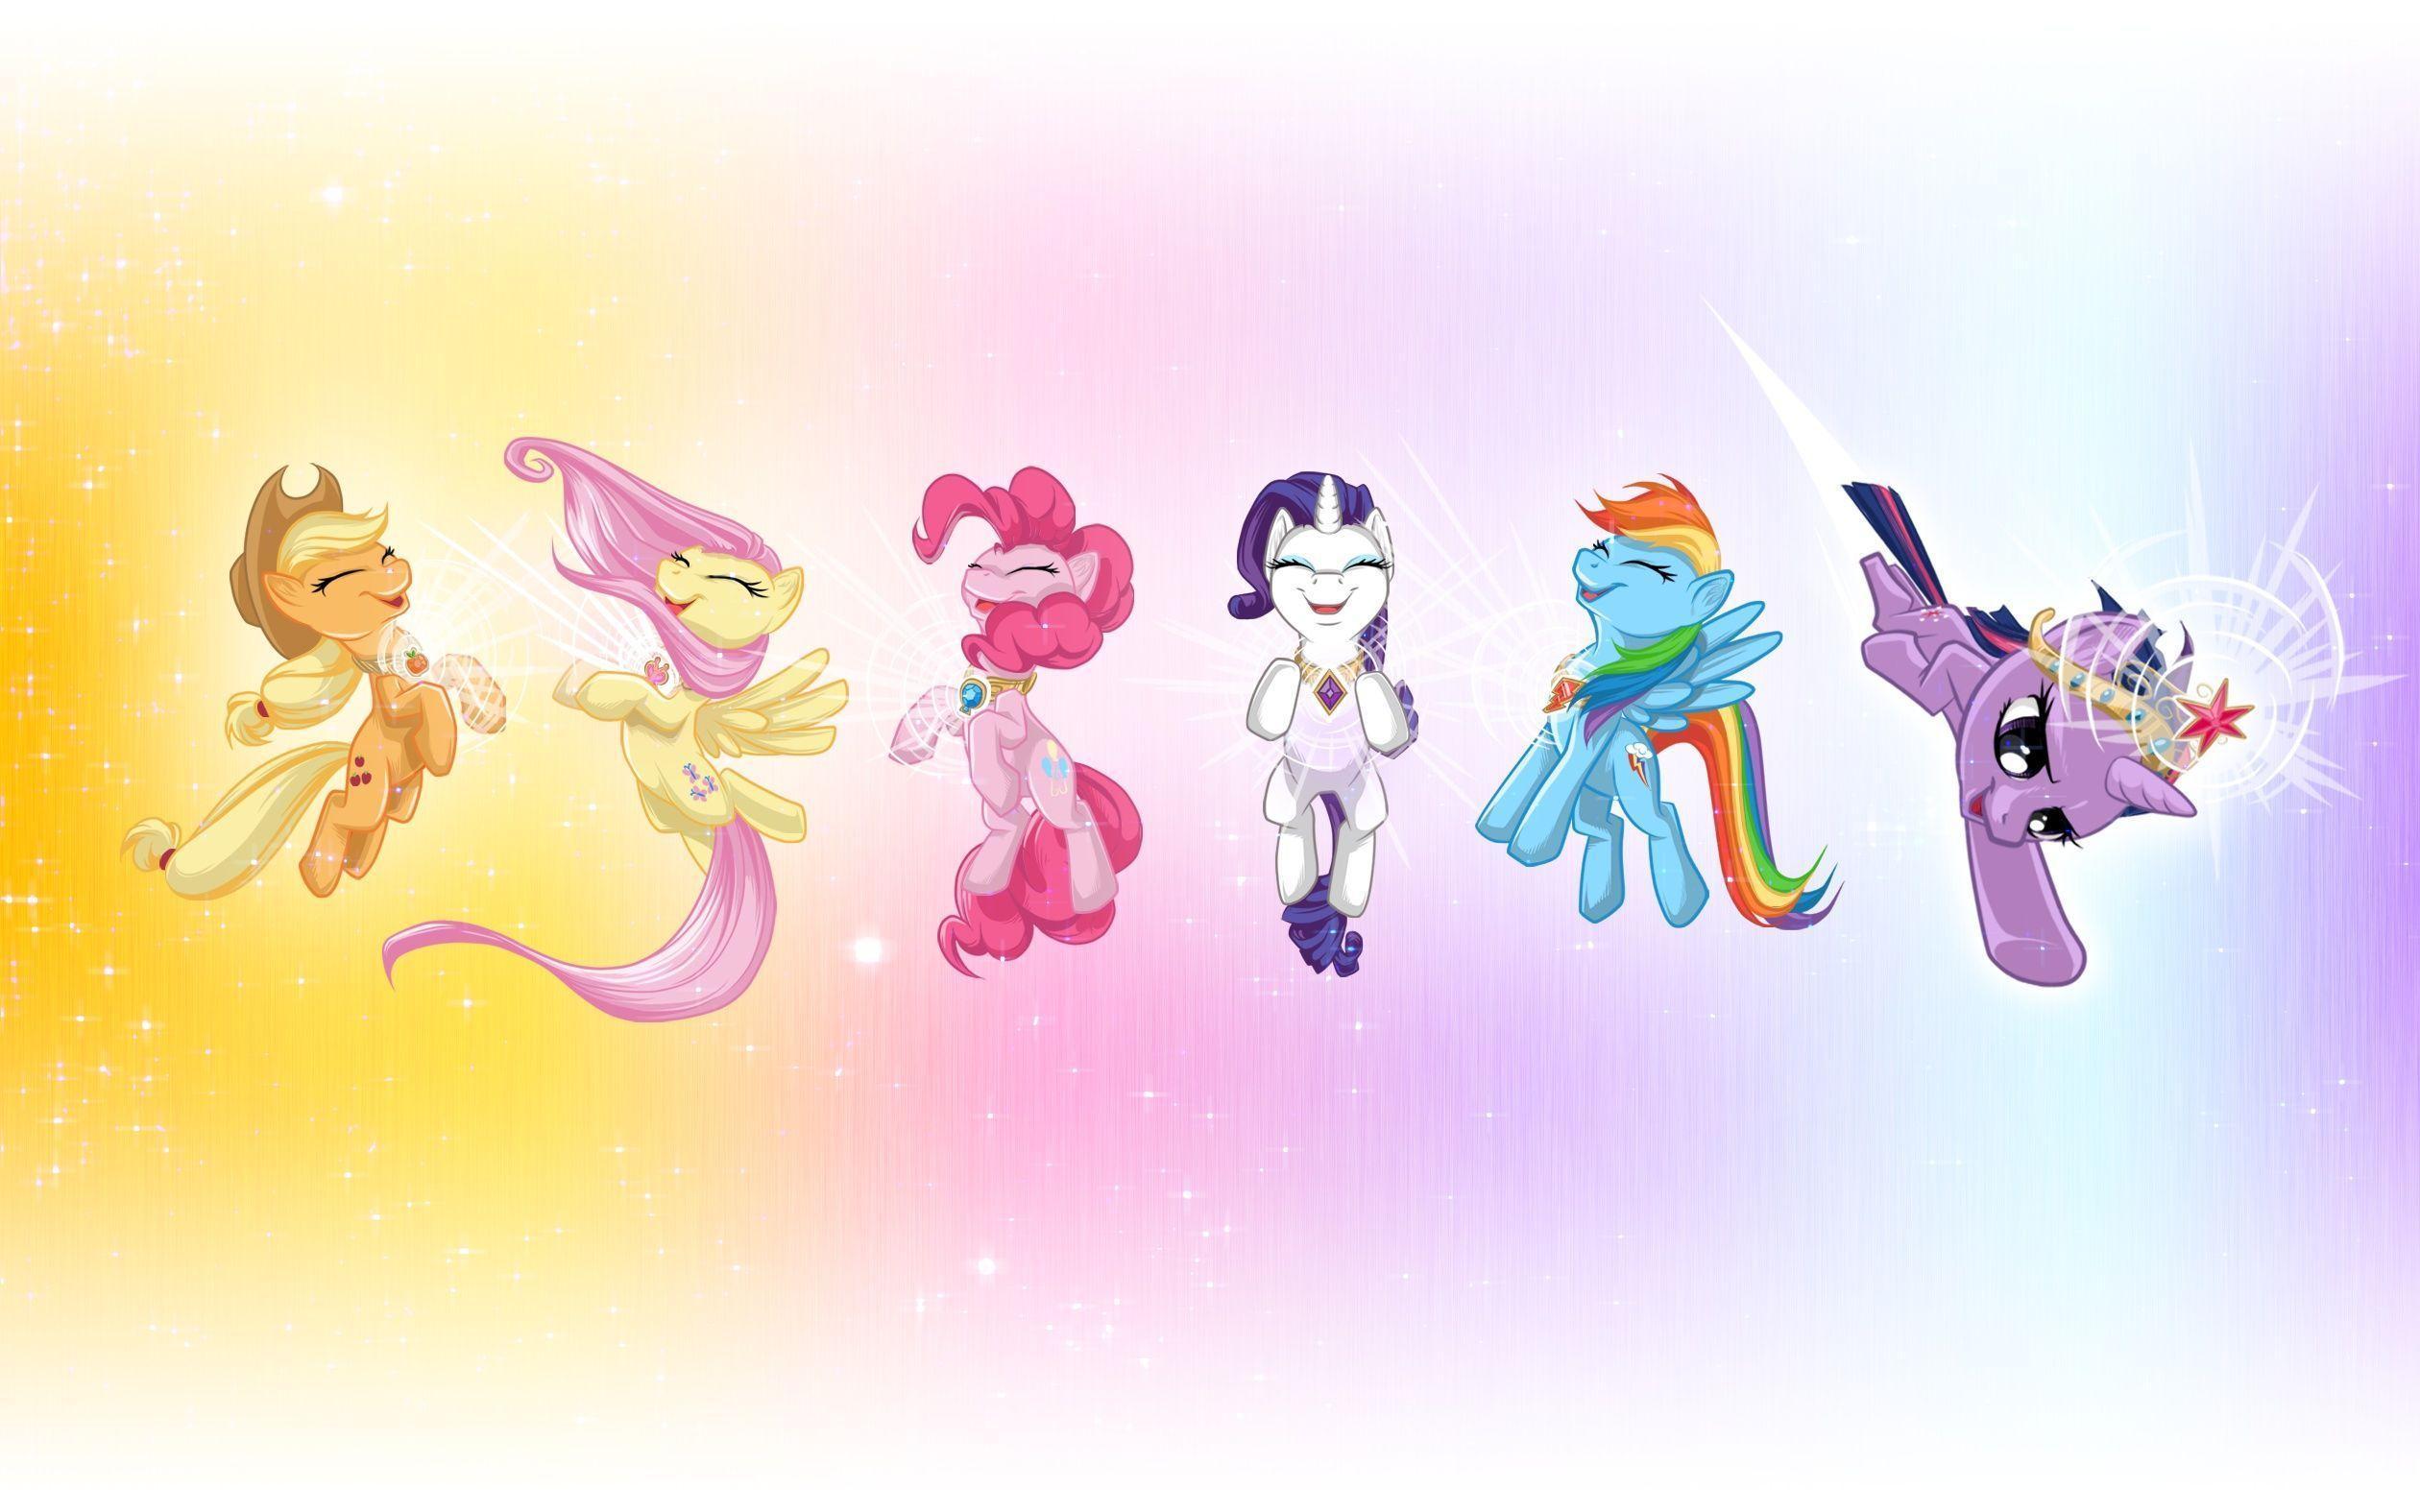 SO. MANY. WALLPAPERS. XD Little Pony Friendship is